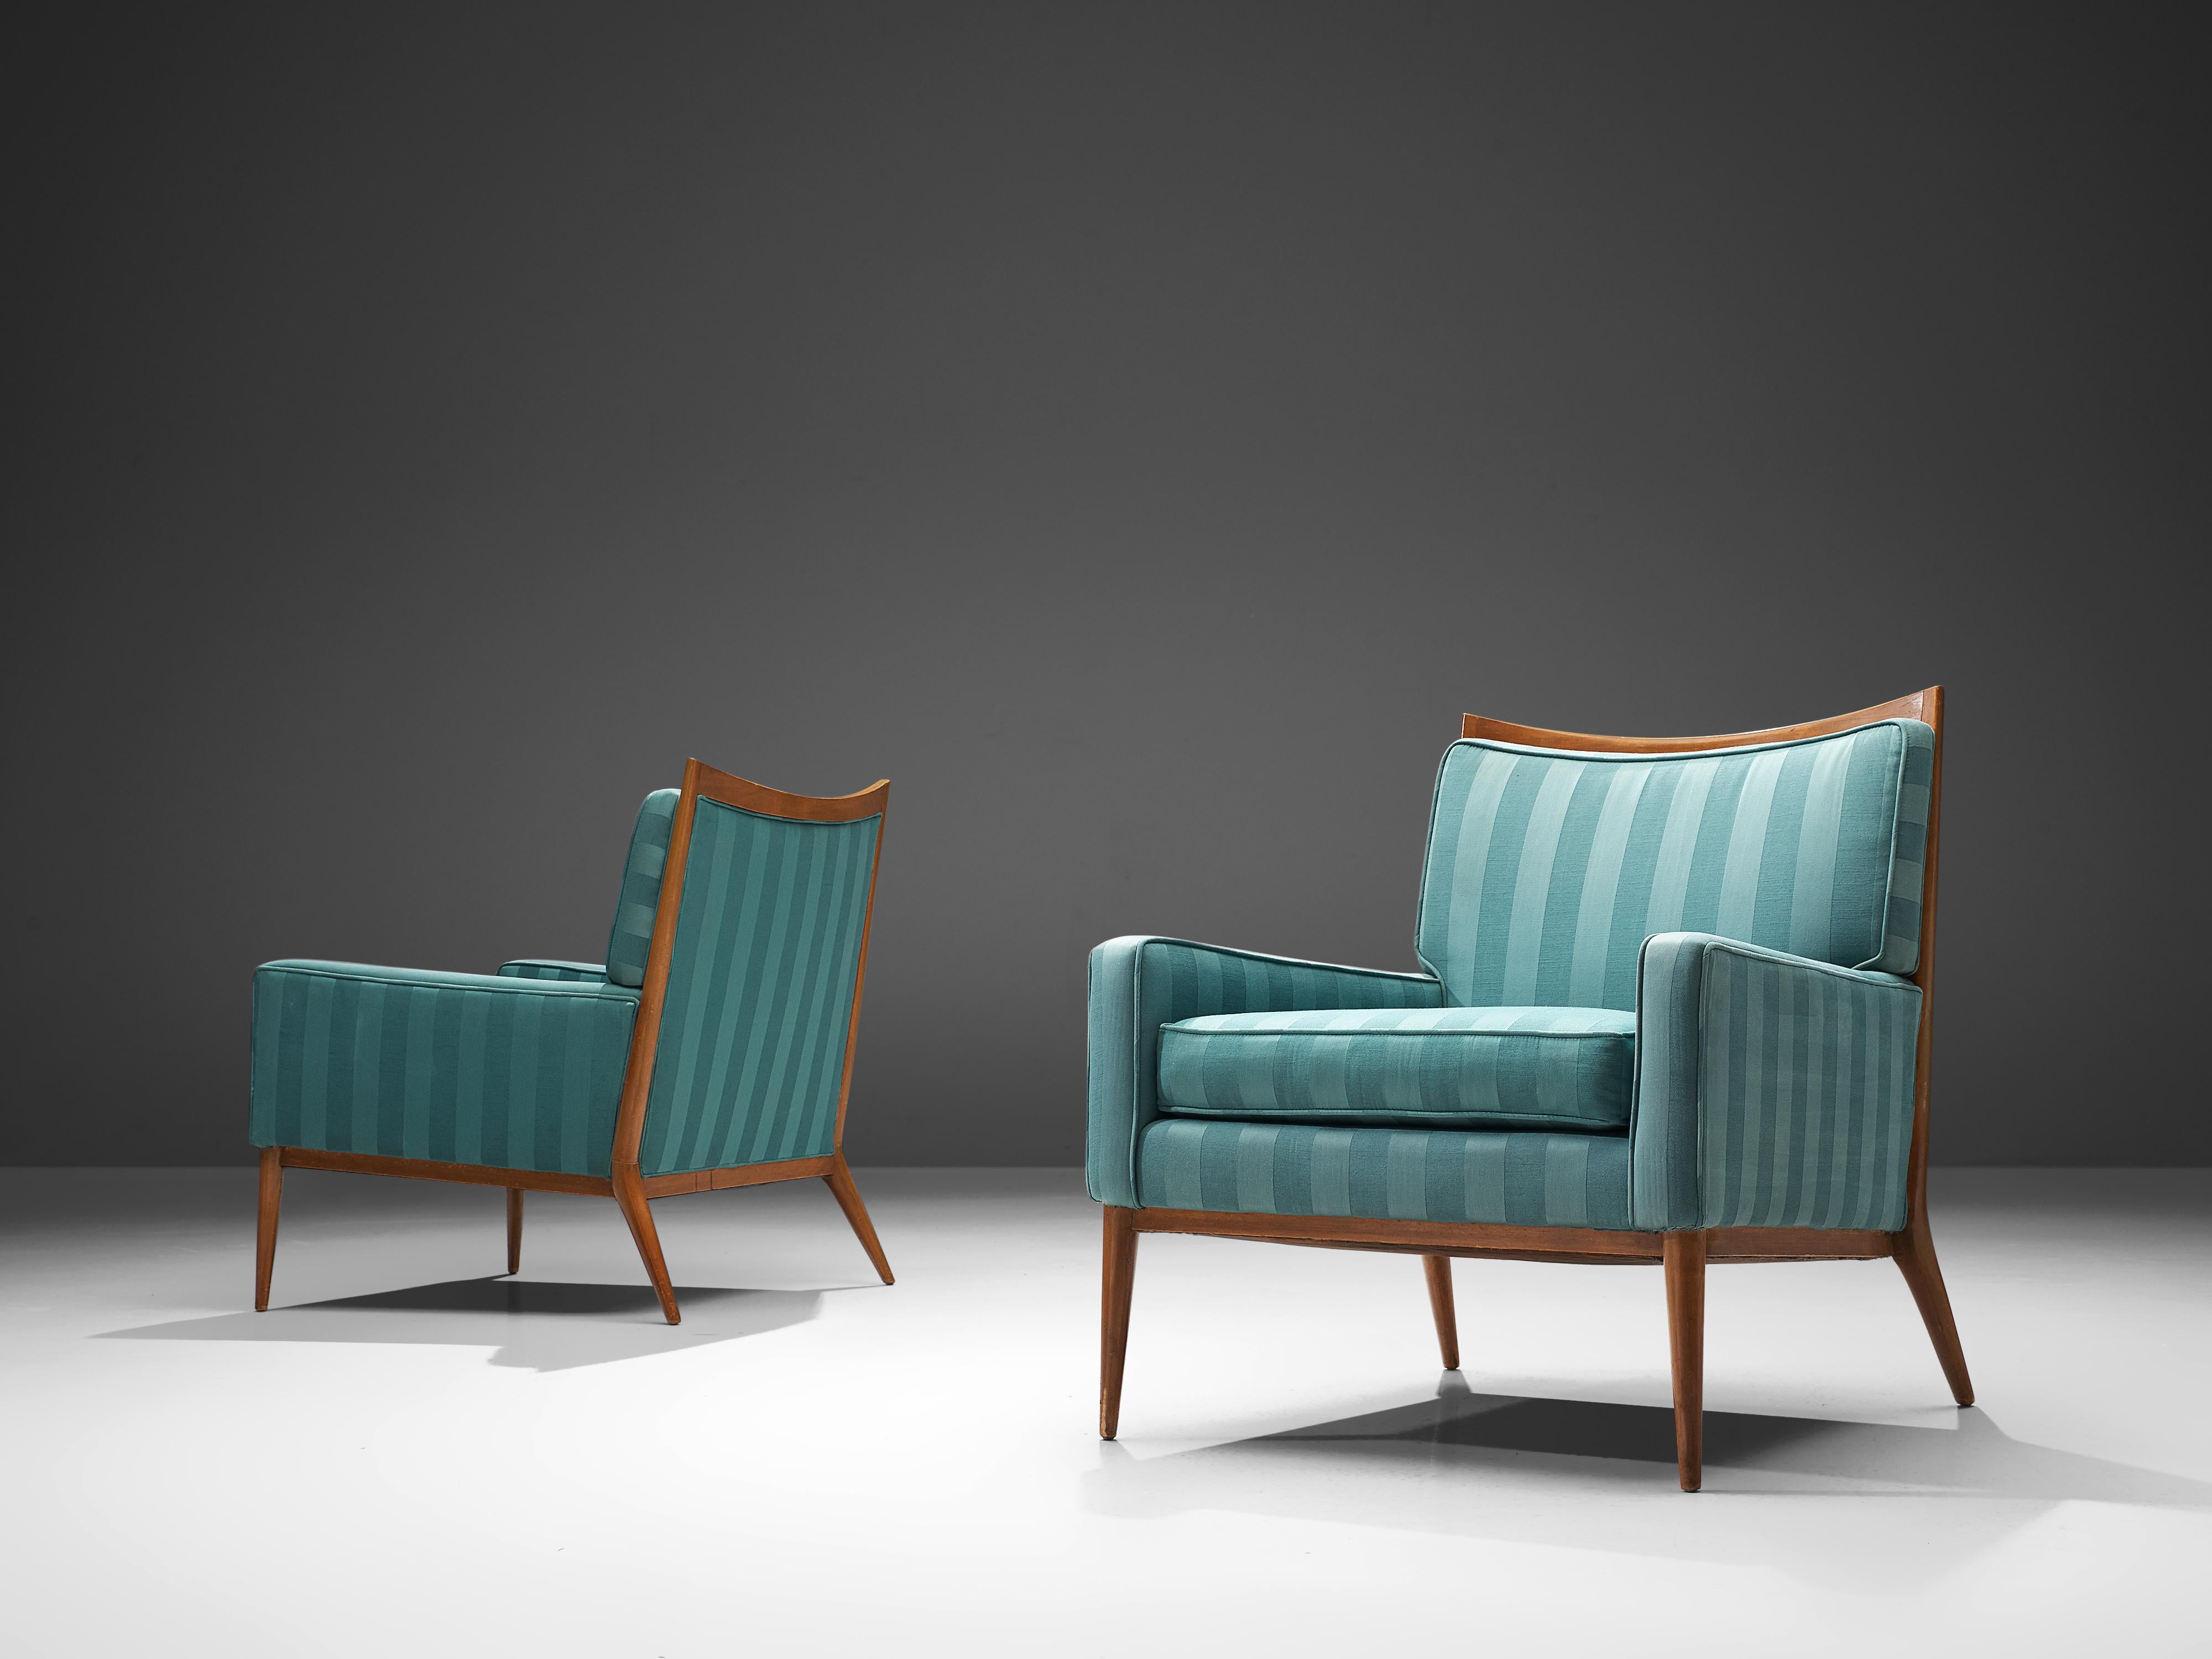 Paul McCobb for Directional Designs, pair of lounge chairs model 1322, walnut, fabric, 1950s. 

This pair of lounge chairs is designed by Paul McCobb. The quintessential design features of McCobb's furniture is clearly visible in this set such as